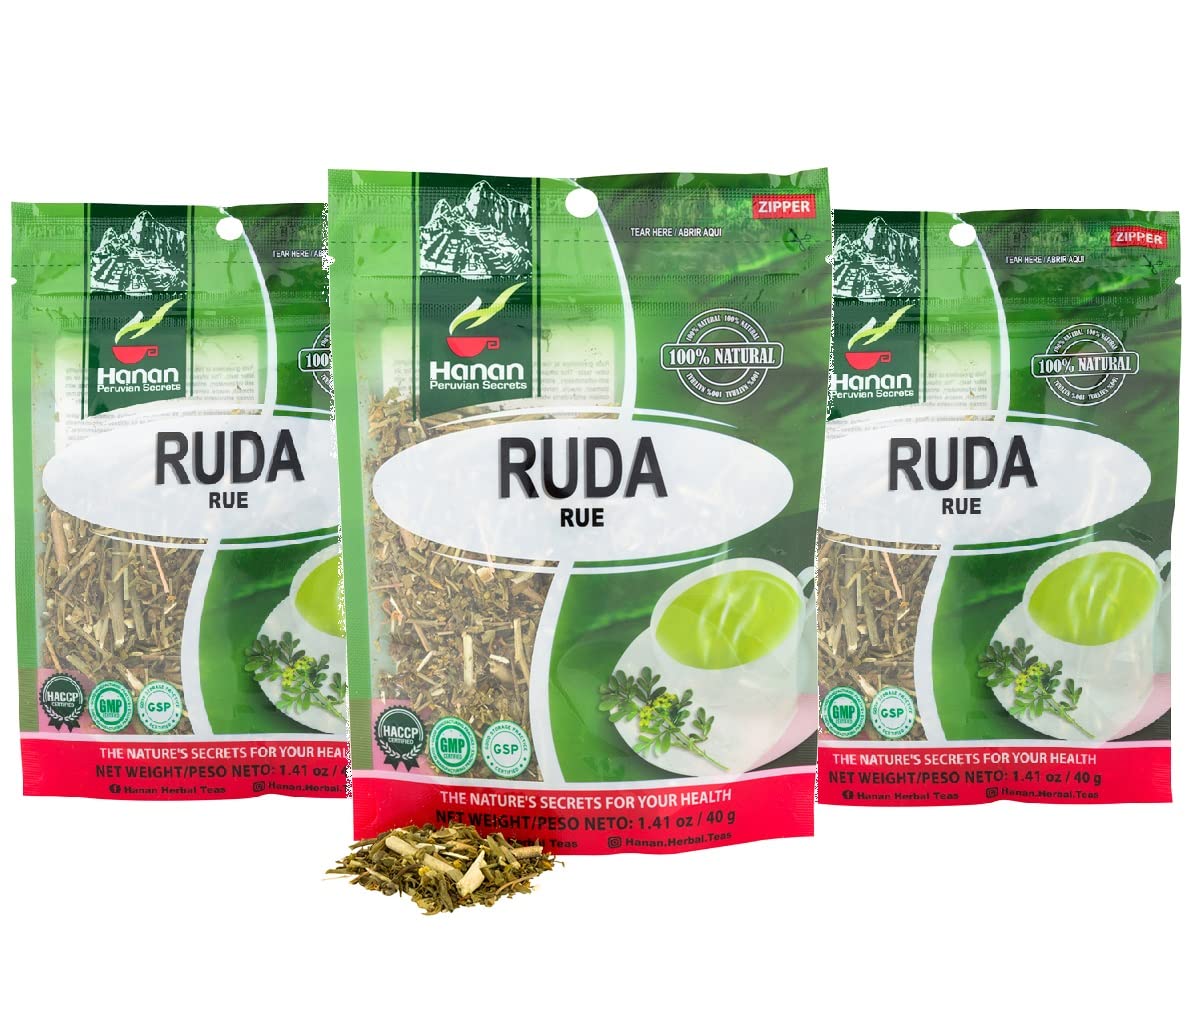 Hanan Ruda Loose Leaf Herbal Tea 42oz (120g of Rue Herb) - Pack of 3 Pouches with 40 grams Each of All-Natural Rue Herb of grace